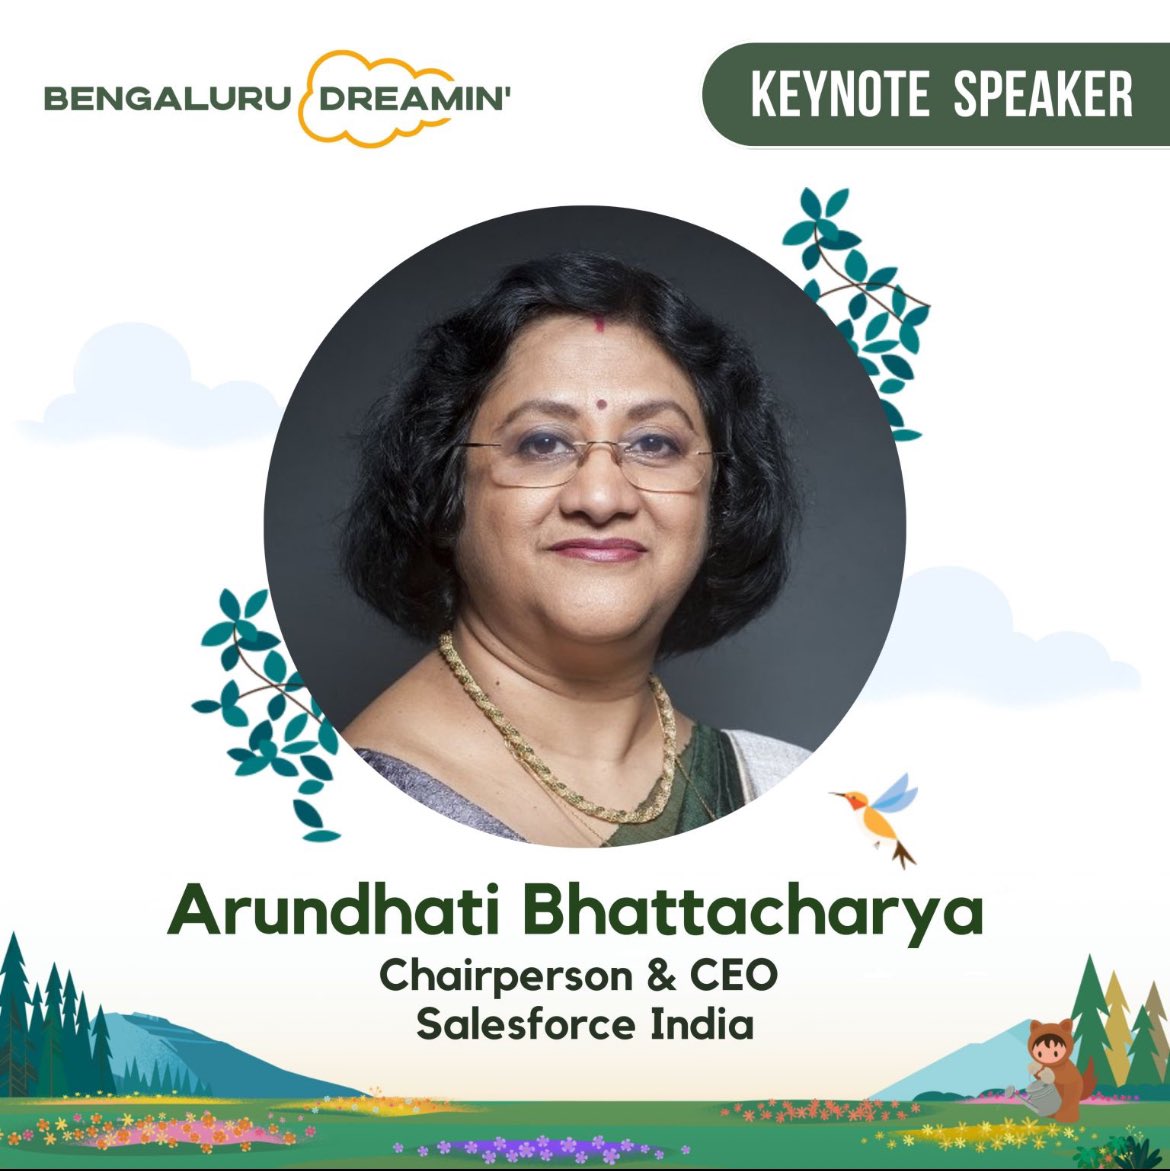 We are thrilled to announce that our very own Salesforce India CEO, Arundhati Bhattacharya will be the keynote speaker at the upcoming Bengaluru Dreamin’ Conference. More details👇 linkedin.com/posts/bengalur… #BengaluruDreamin24 #Salesforce #trailblazercommunity #Keynote